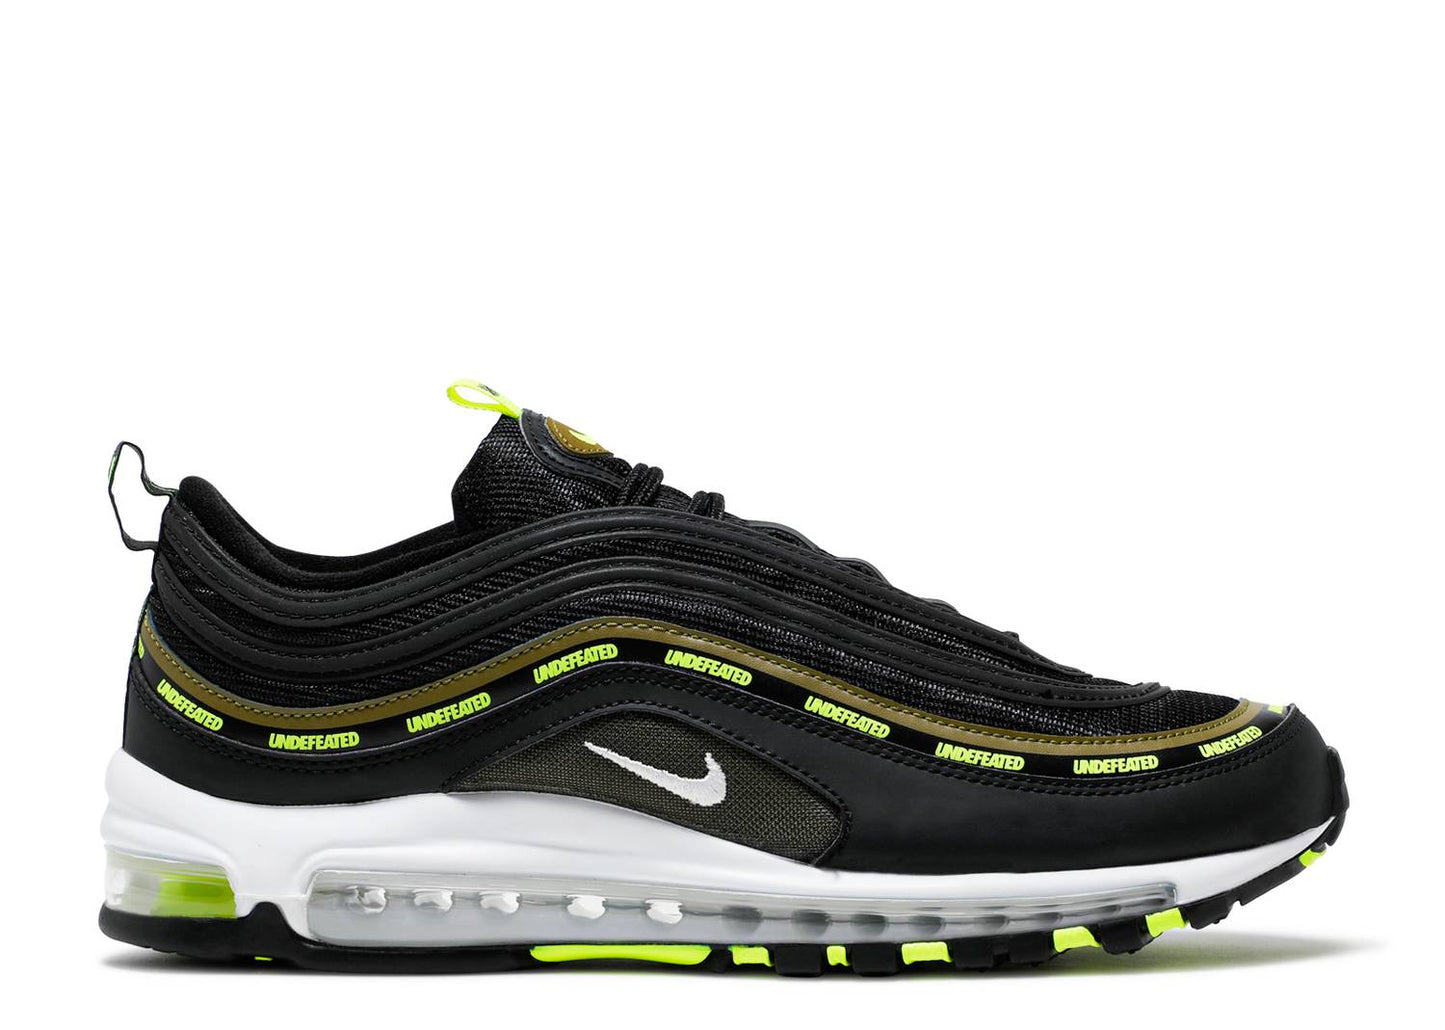 Nike Air Max 97 "Undefeated Black"